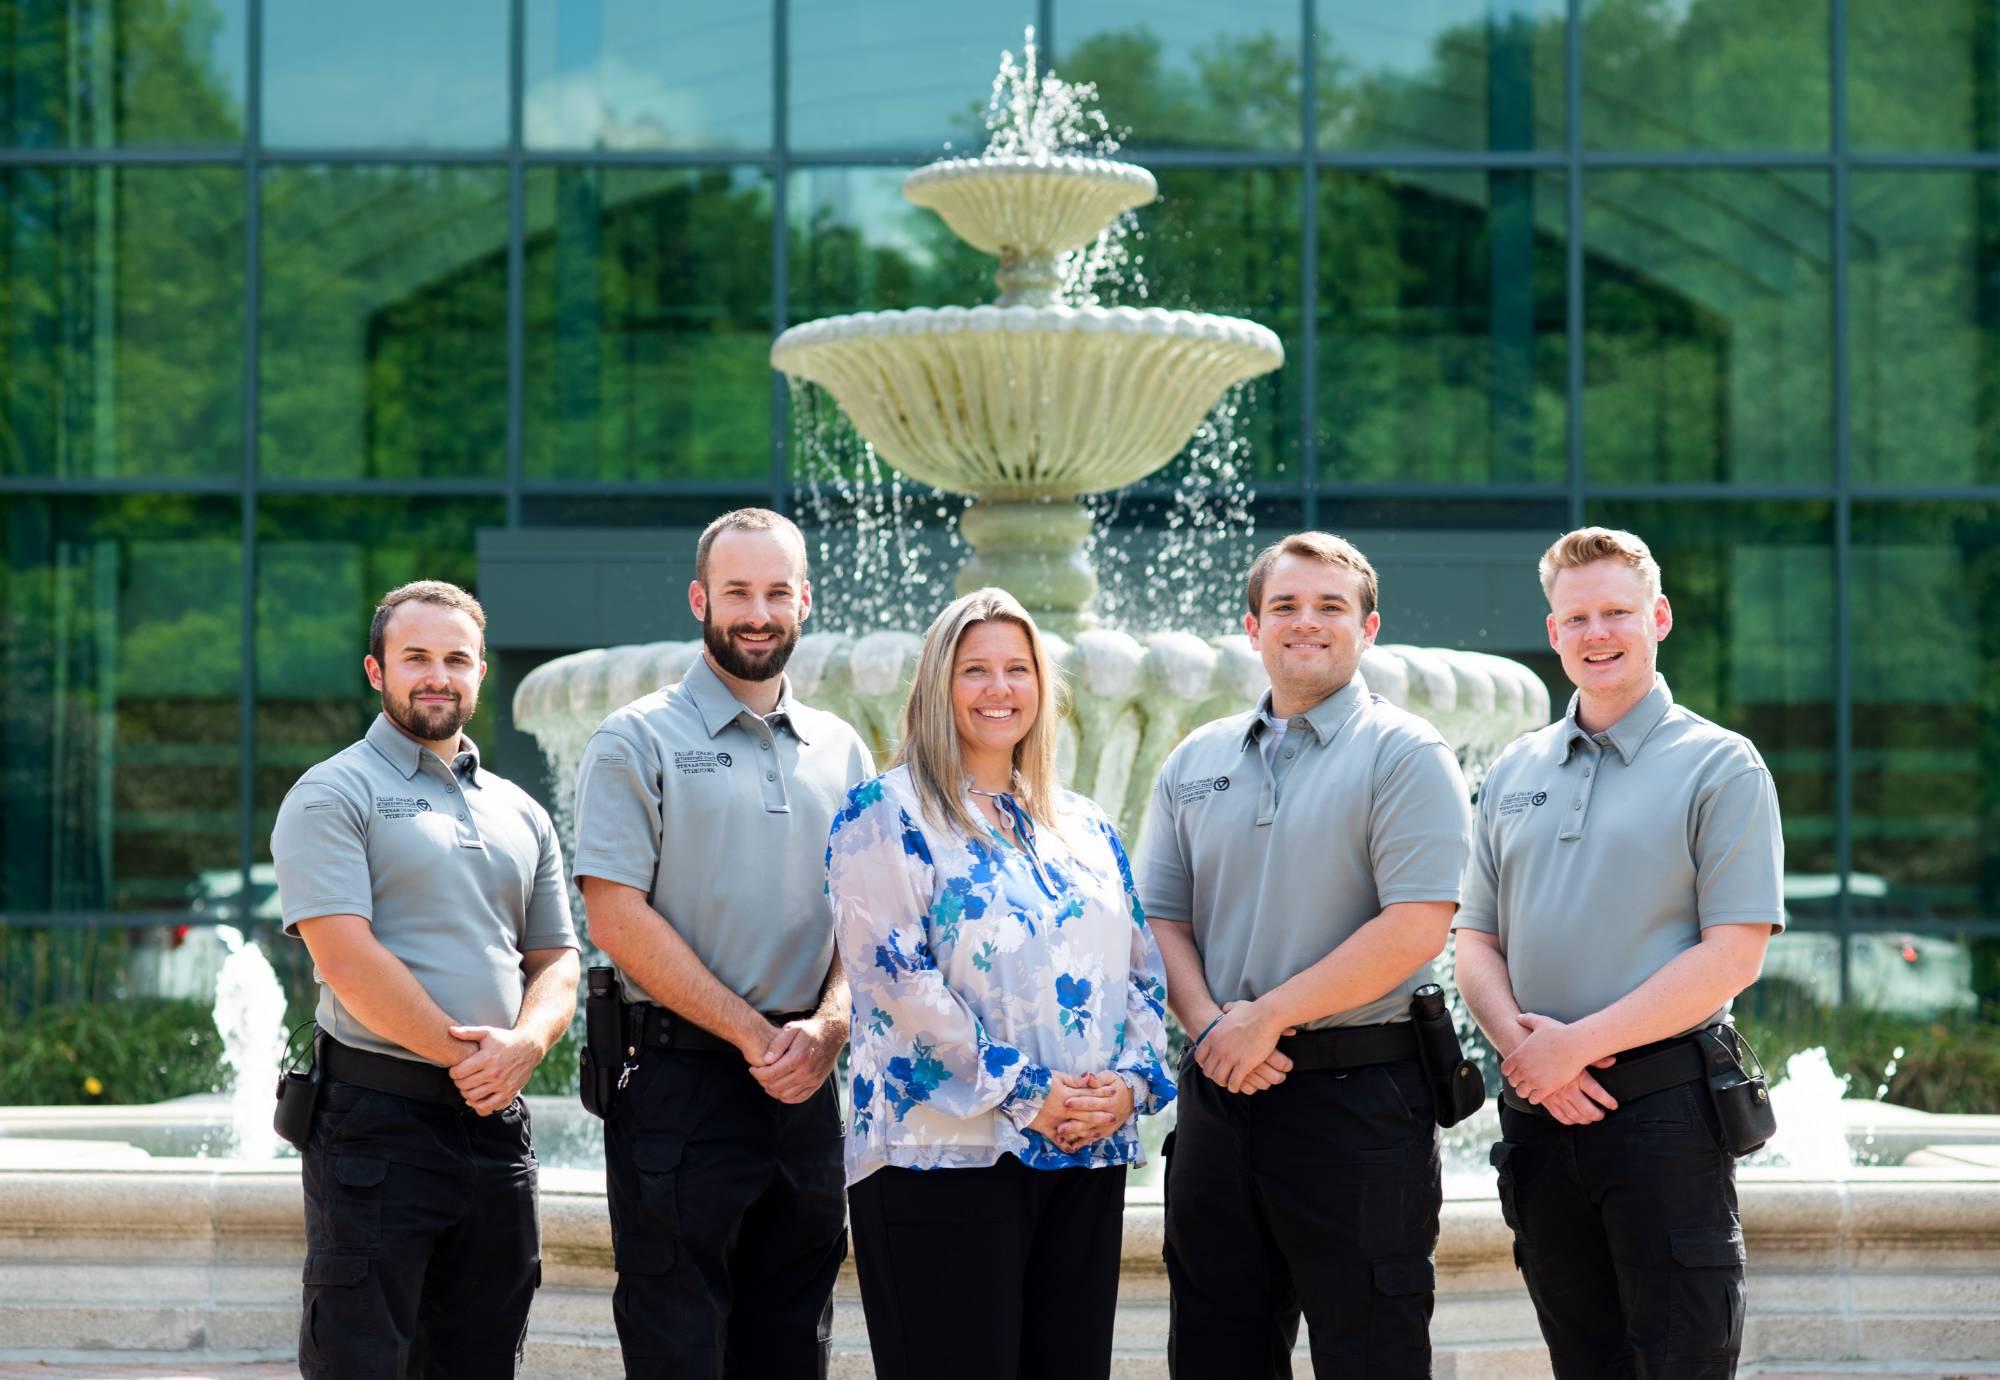 Security employees, 4 in uniform, and 1 supervisor in plain clothes, posing in front of the Student Services fountain. Subjects are smiling.